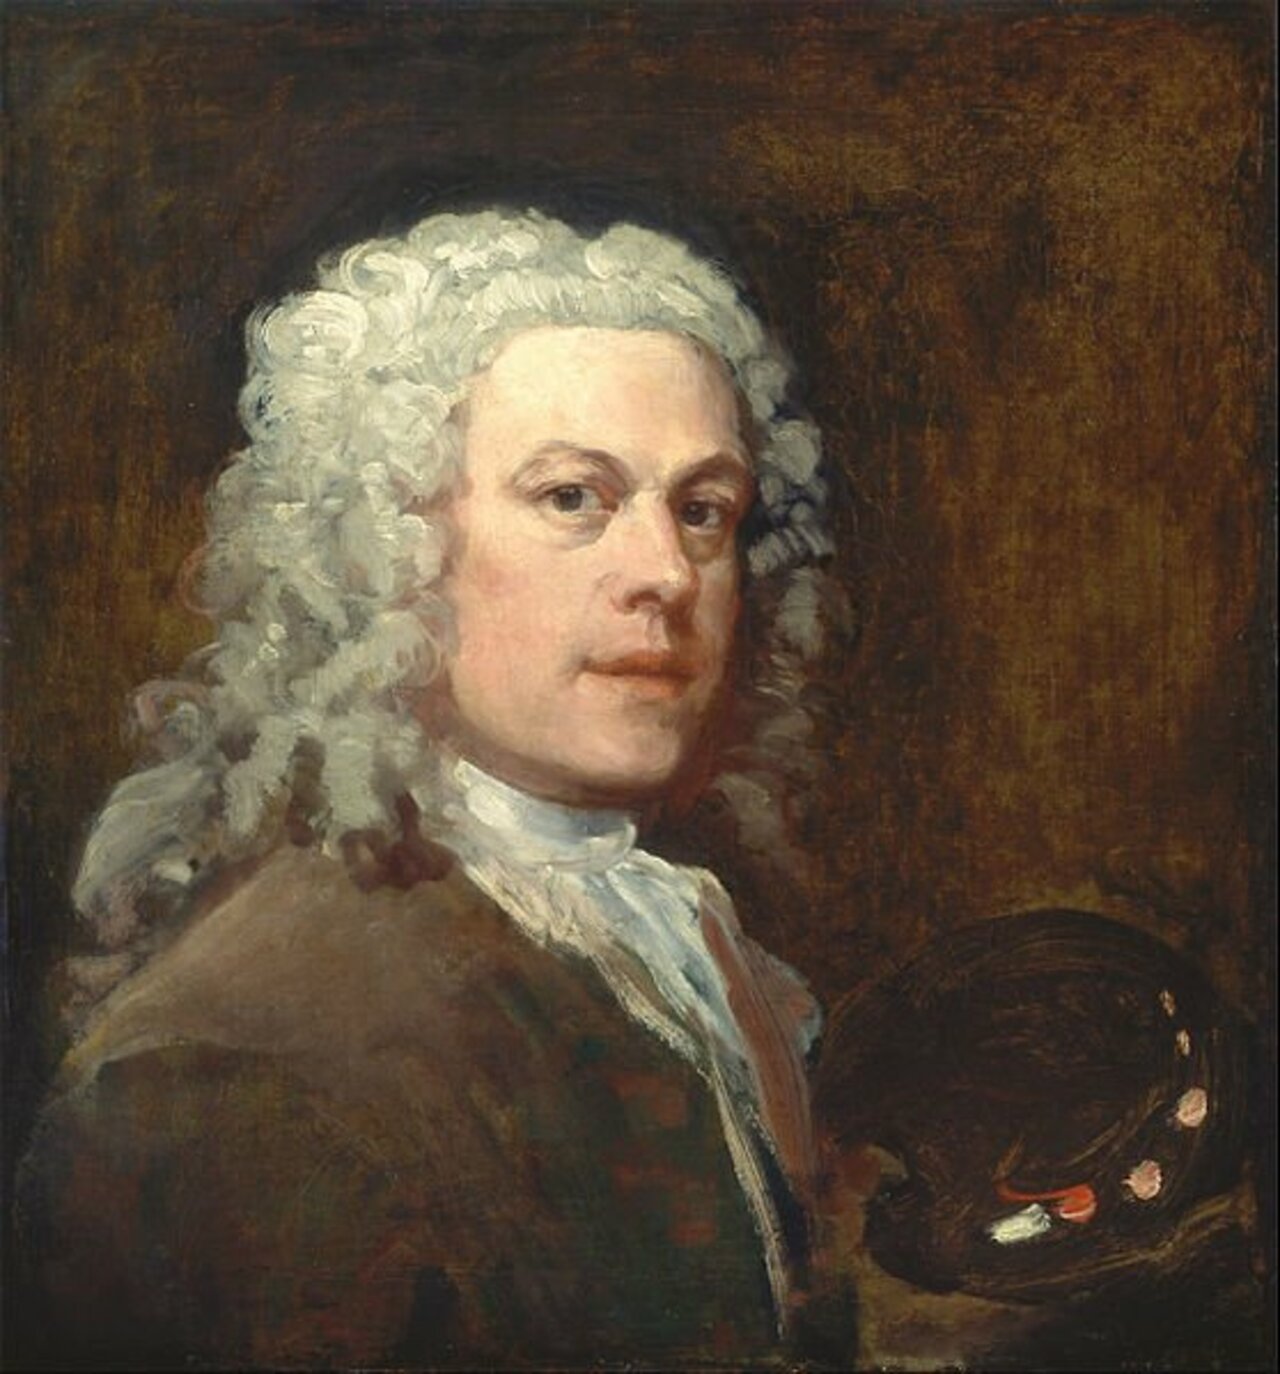 A self portrait by William Hogarth, one of the great painters of the 18th century. Hogarth died #onthisday in 1764, leaving behind a remarkable body of work. #art #gloriousGeorgians https://t.co/ZQTEGd6Ks6